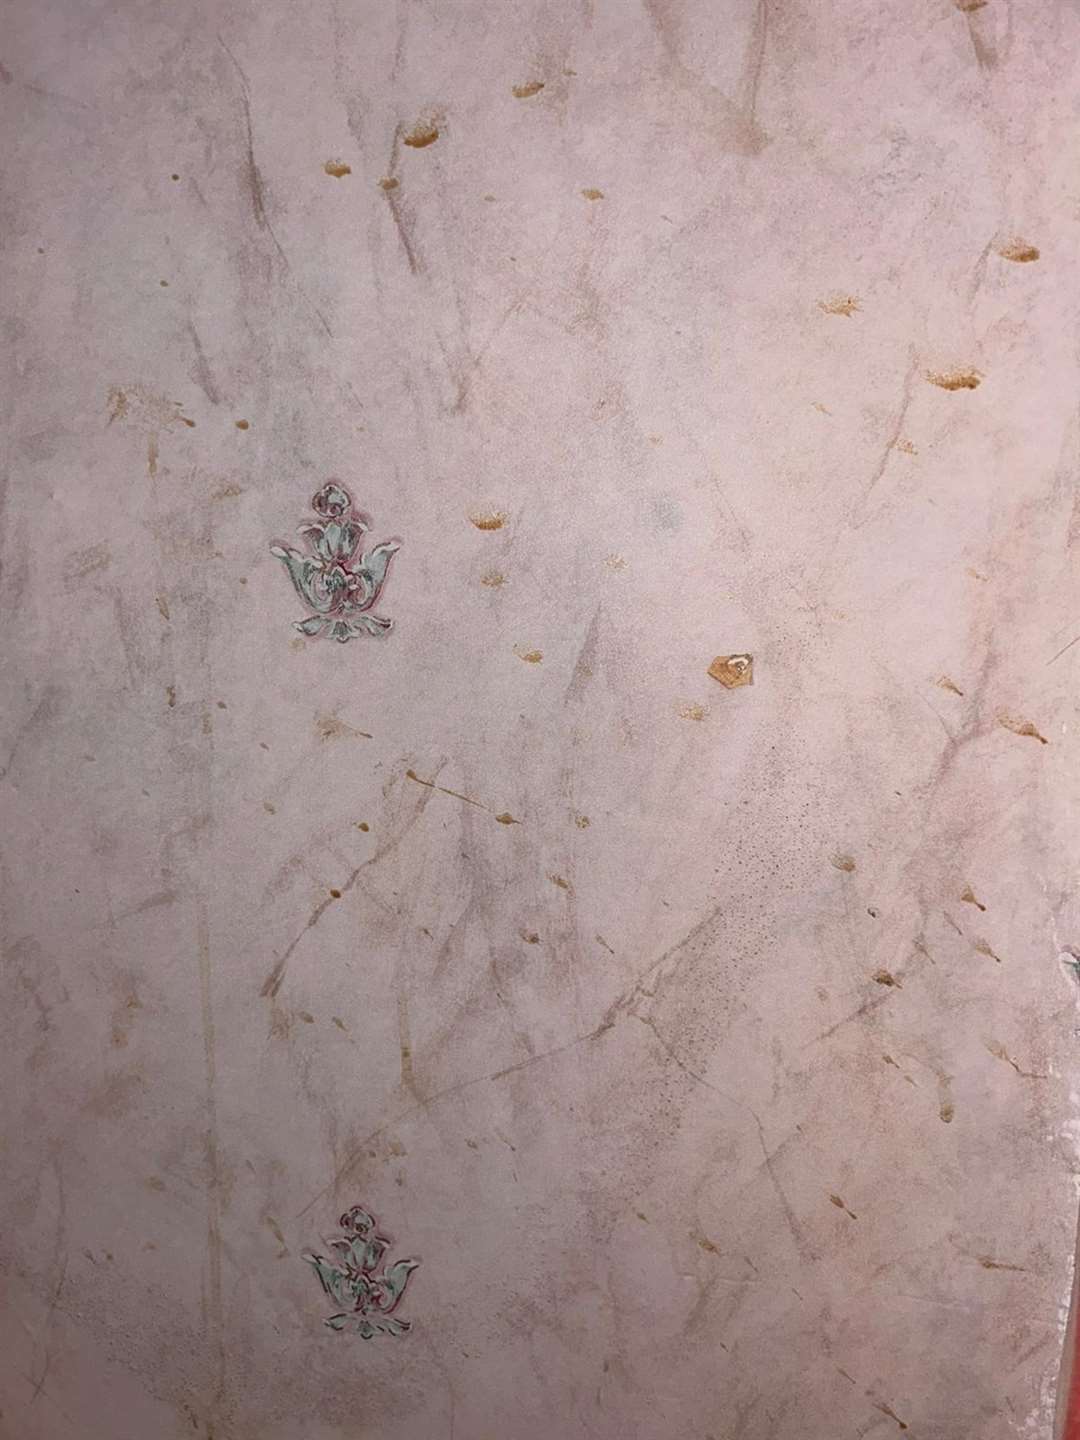 The outdated wallpaper was covered in filthy marks